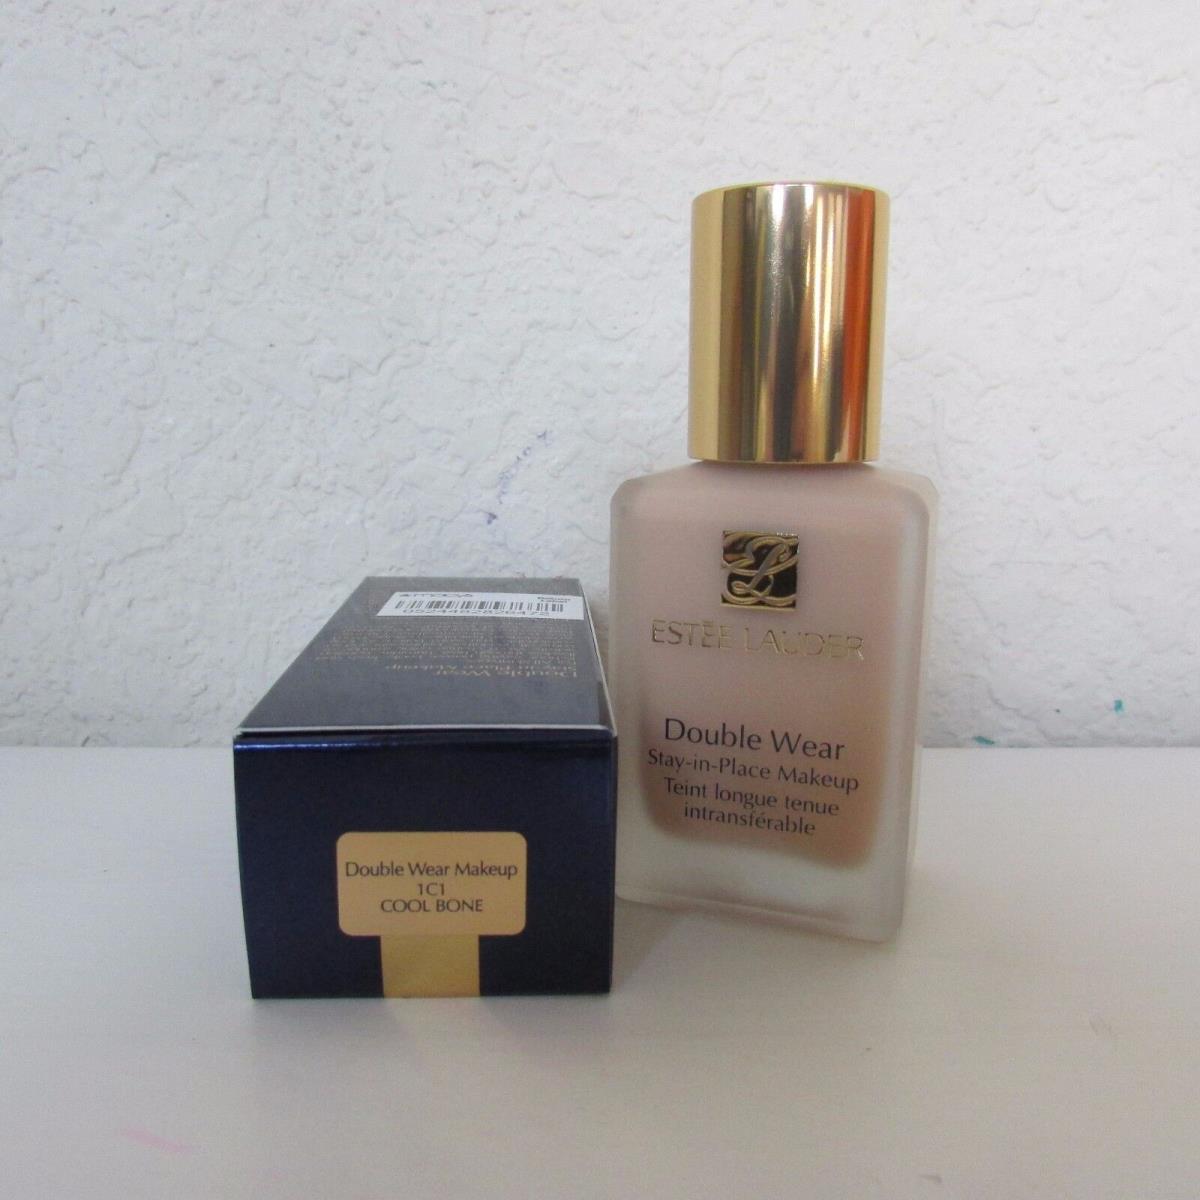 Estee Lauder Double Wear Stay-in-place Makeup Choose Your Shade 1.0 Oz/30 ml 1C1 Cool Bone